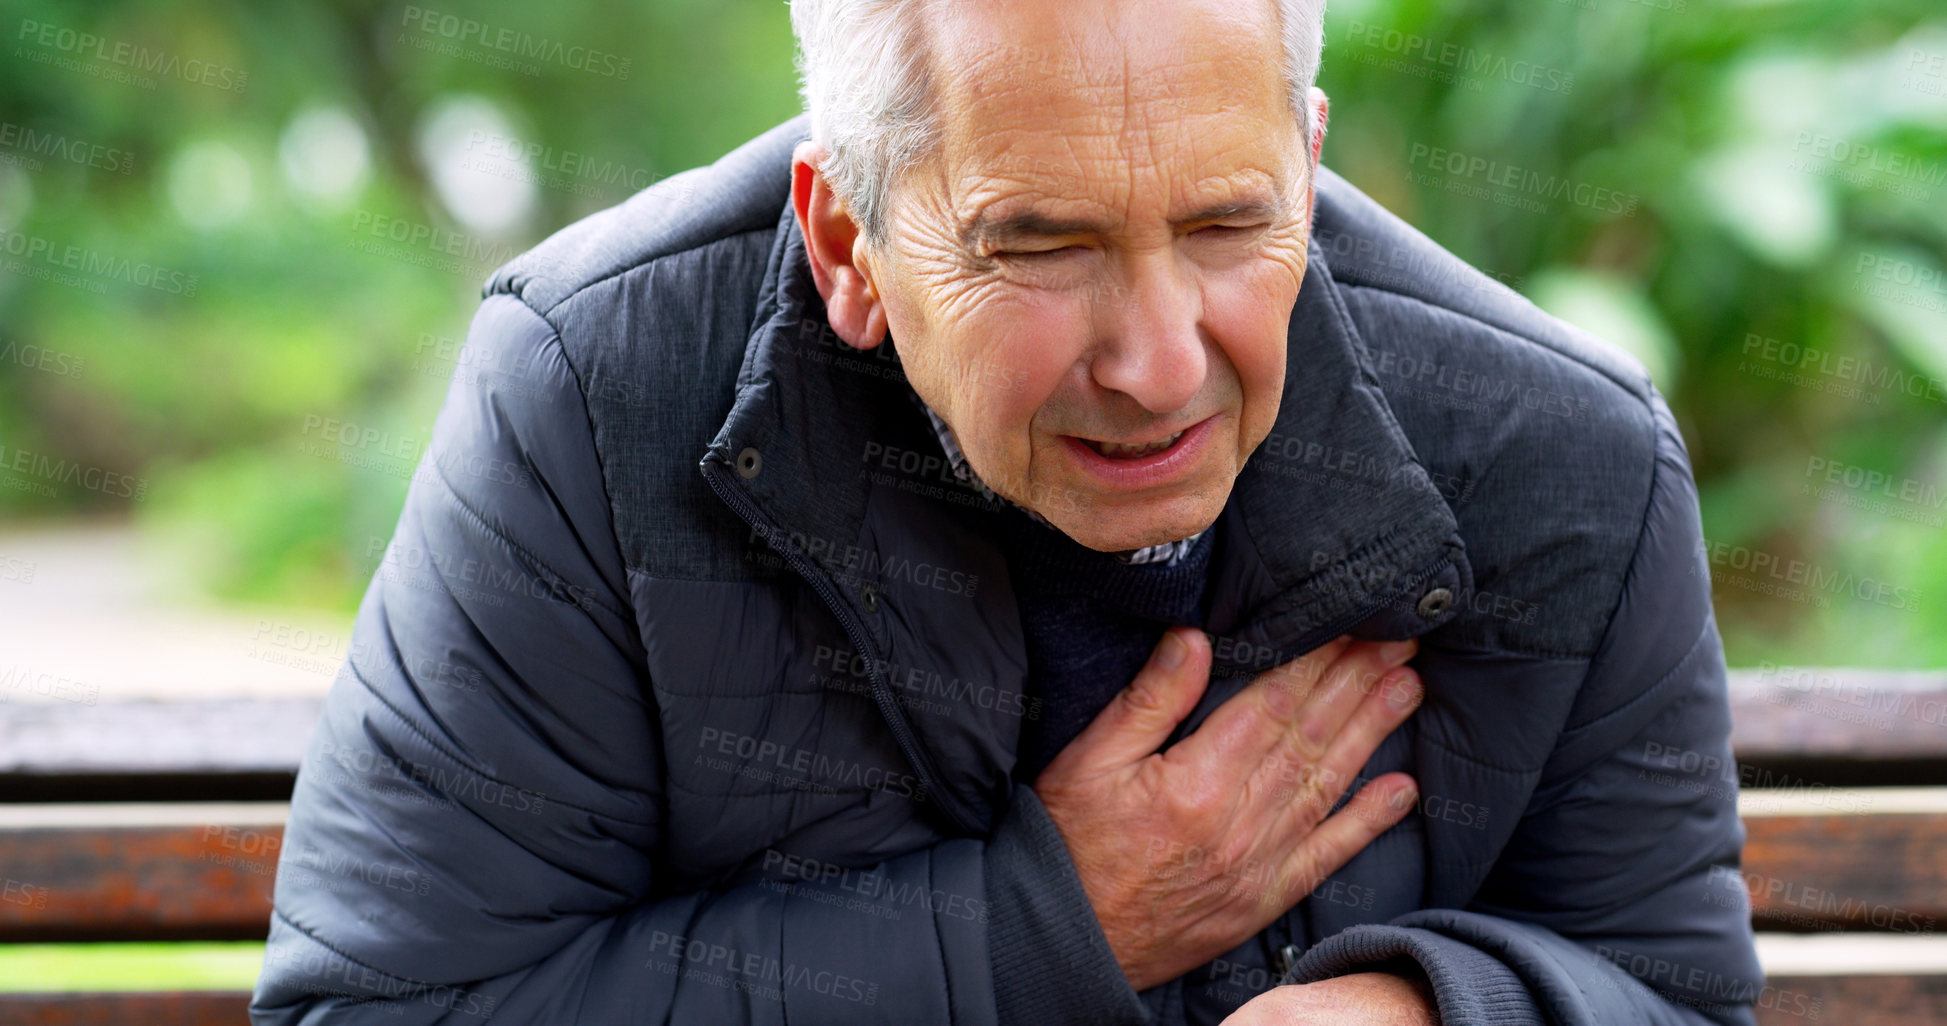 Buy stock photo Cropped shot of a stressed out elderly man seated on a bench and holding his chest in discomfort outside in a park